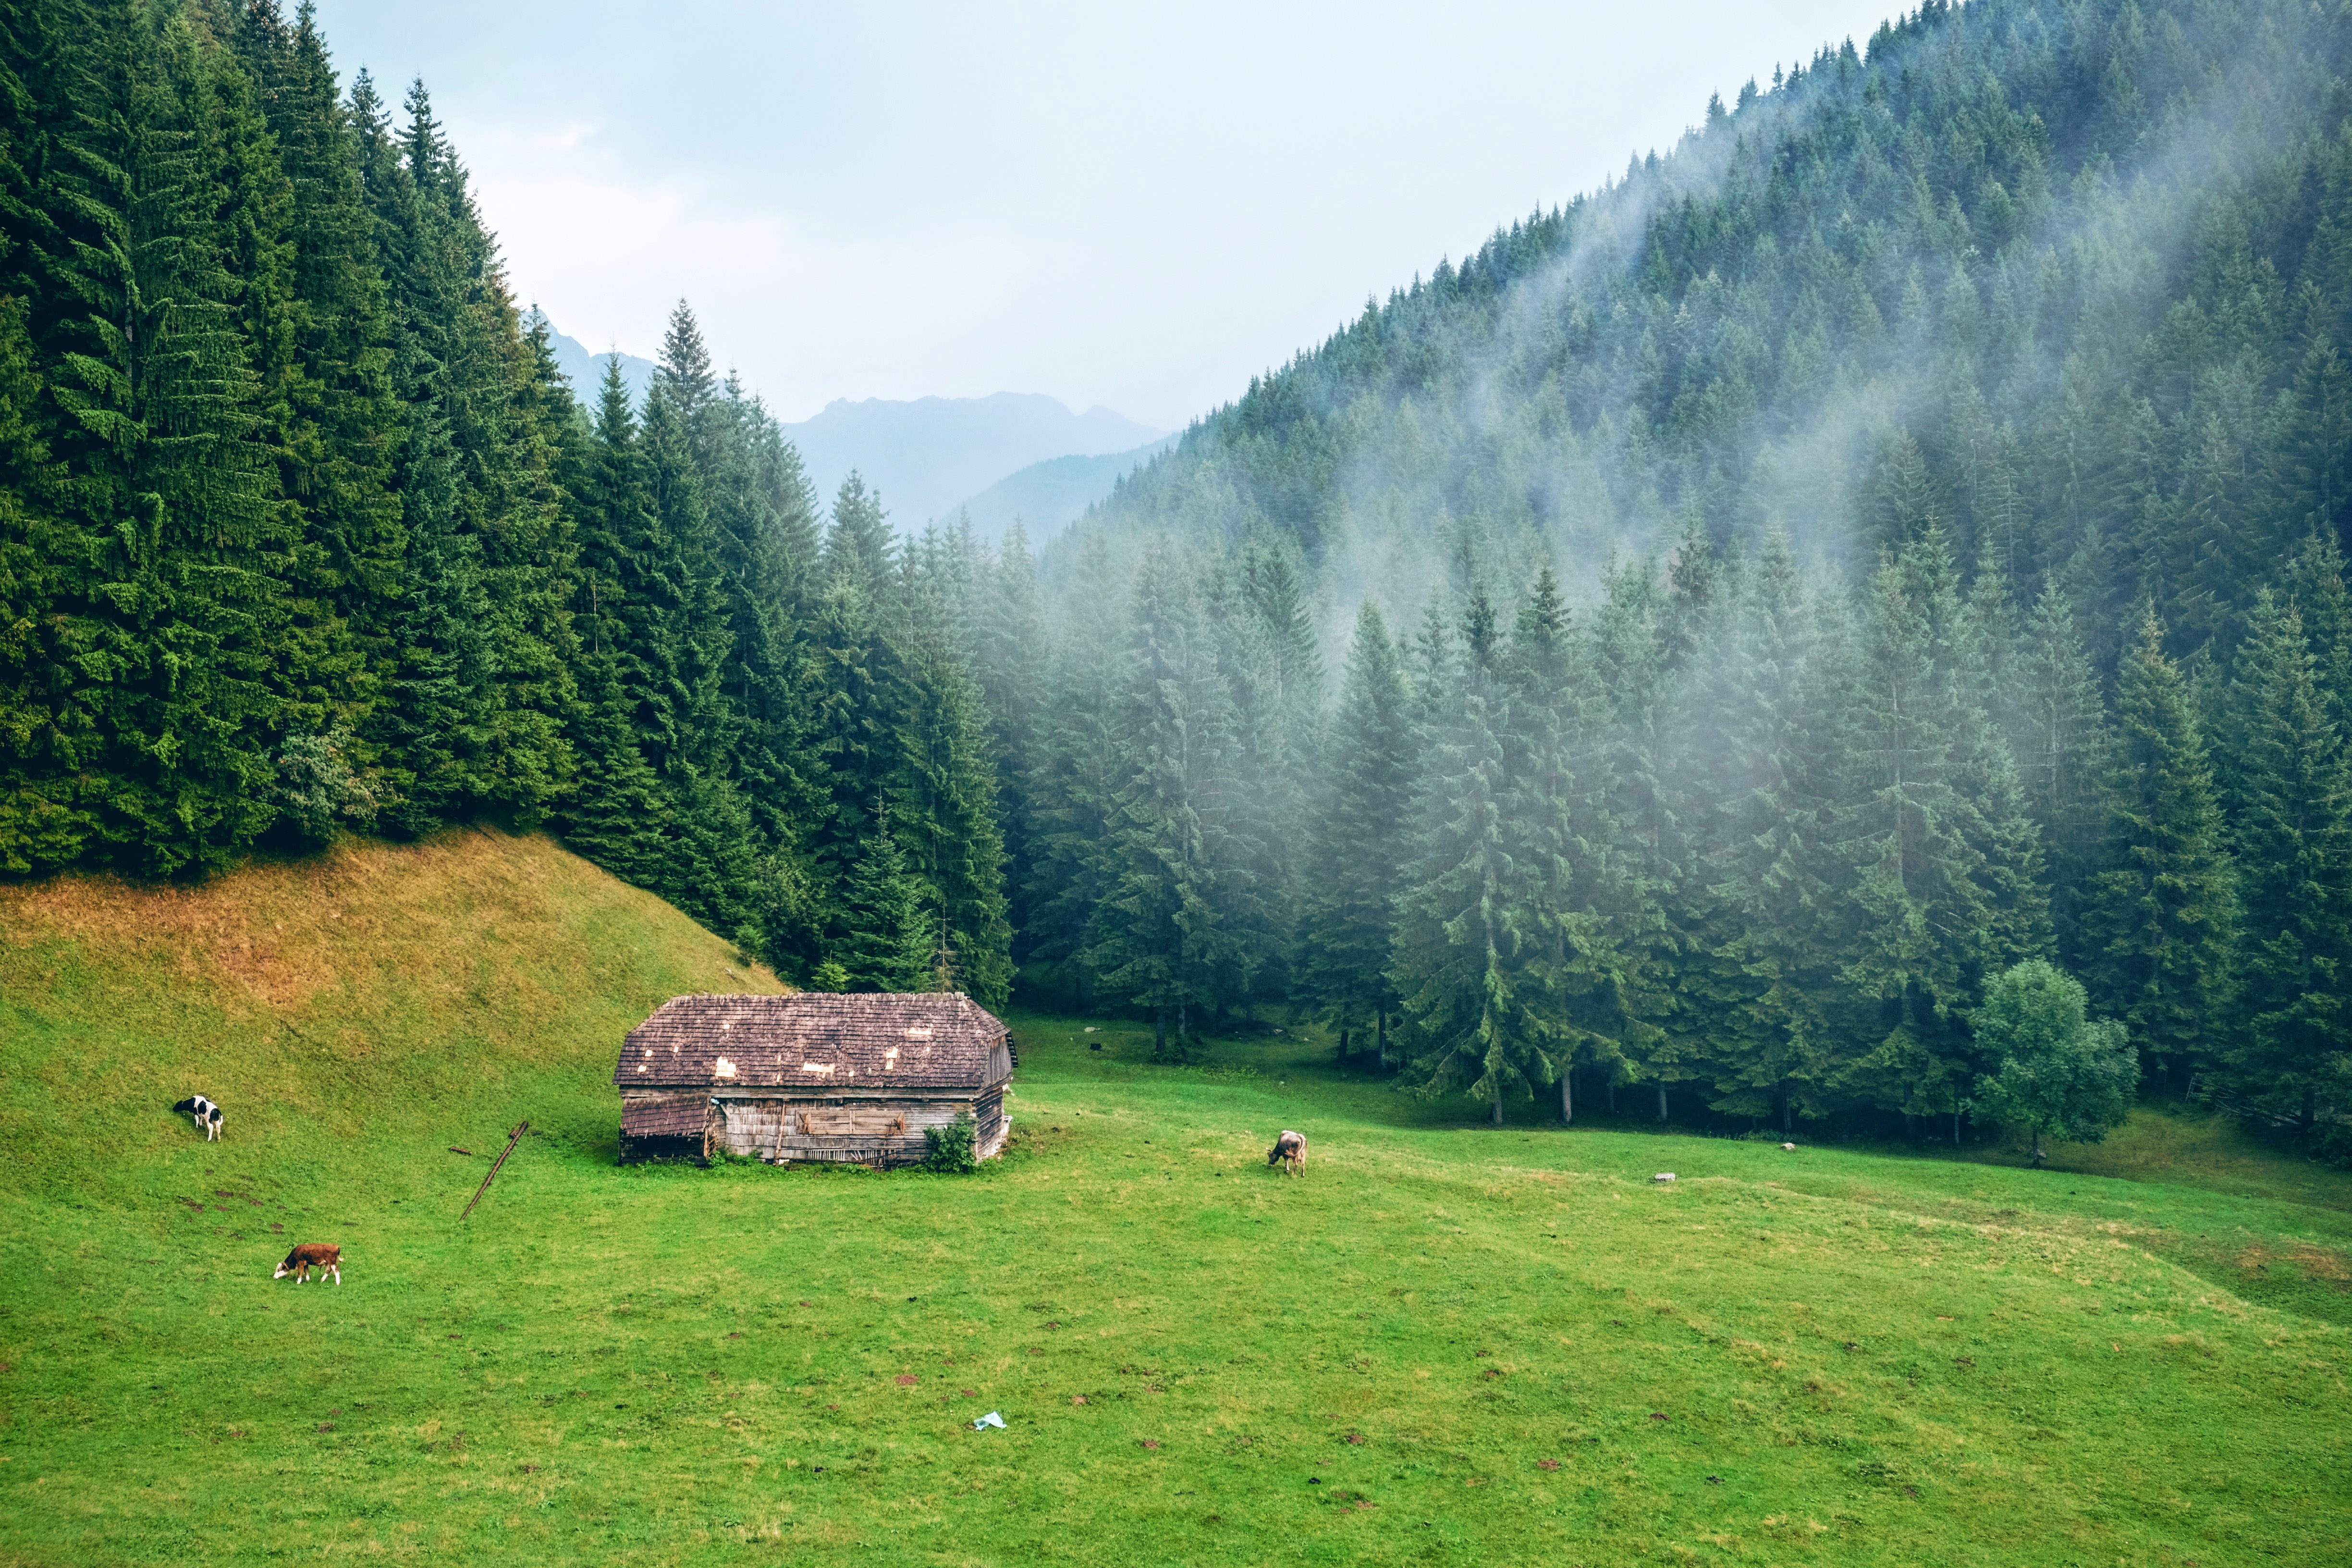 Mountain and Forest landscape in Romania image - Free stock photo ...